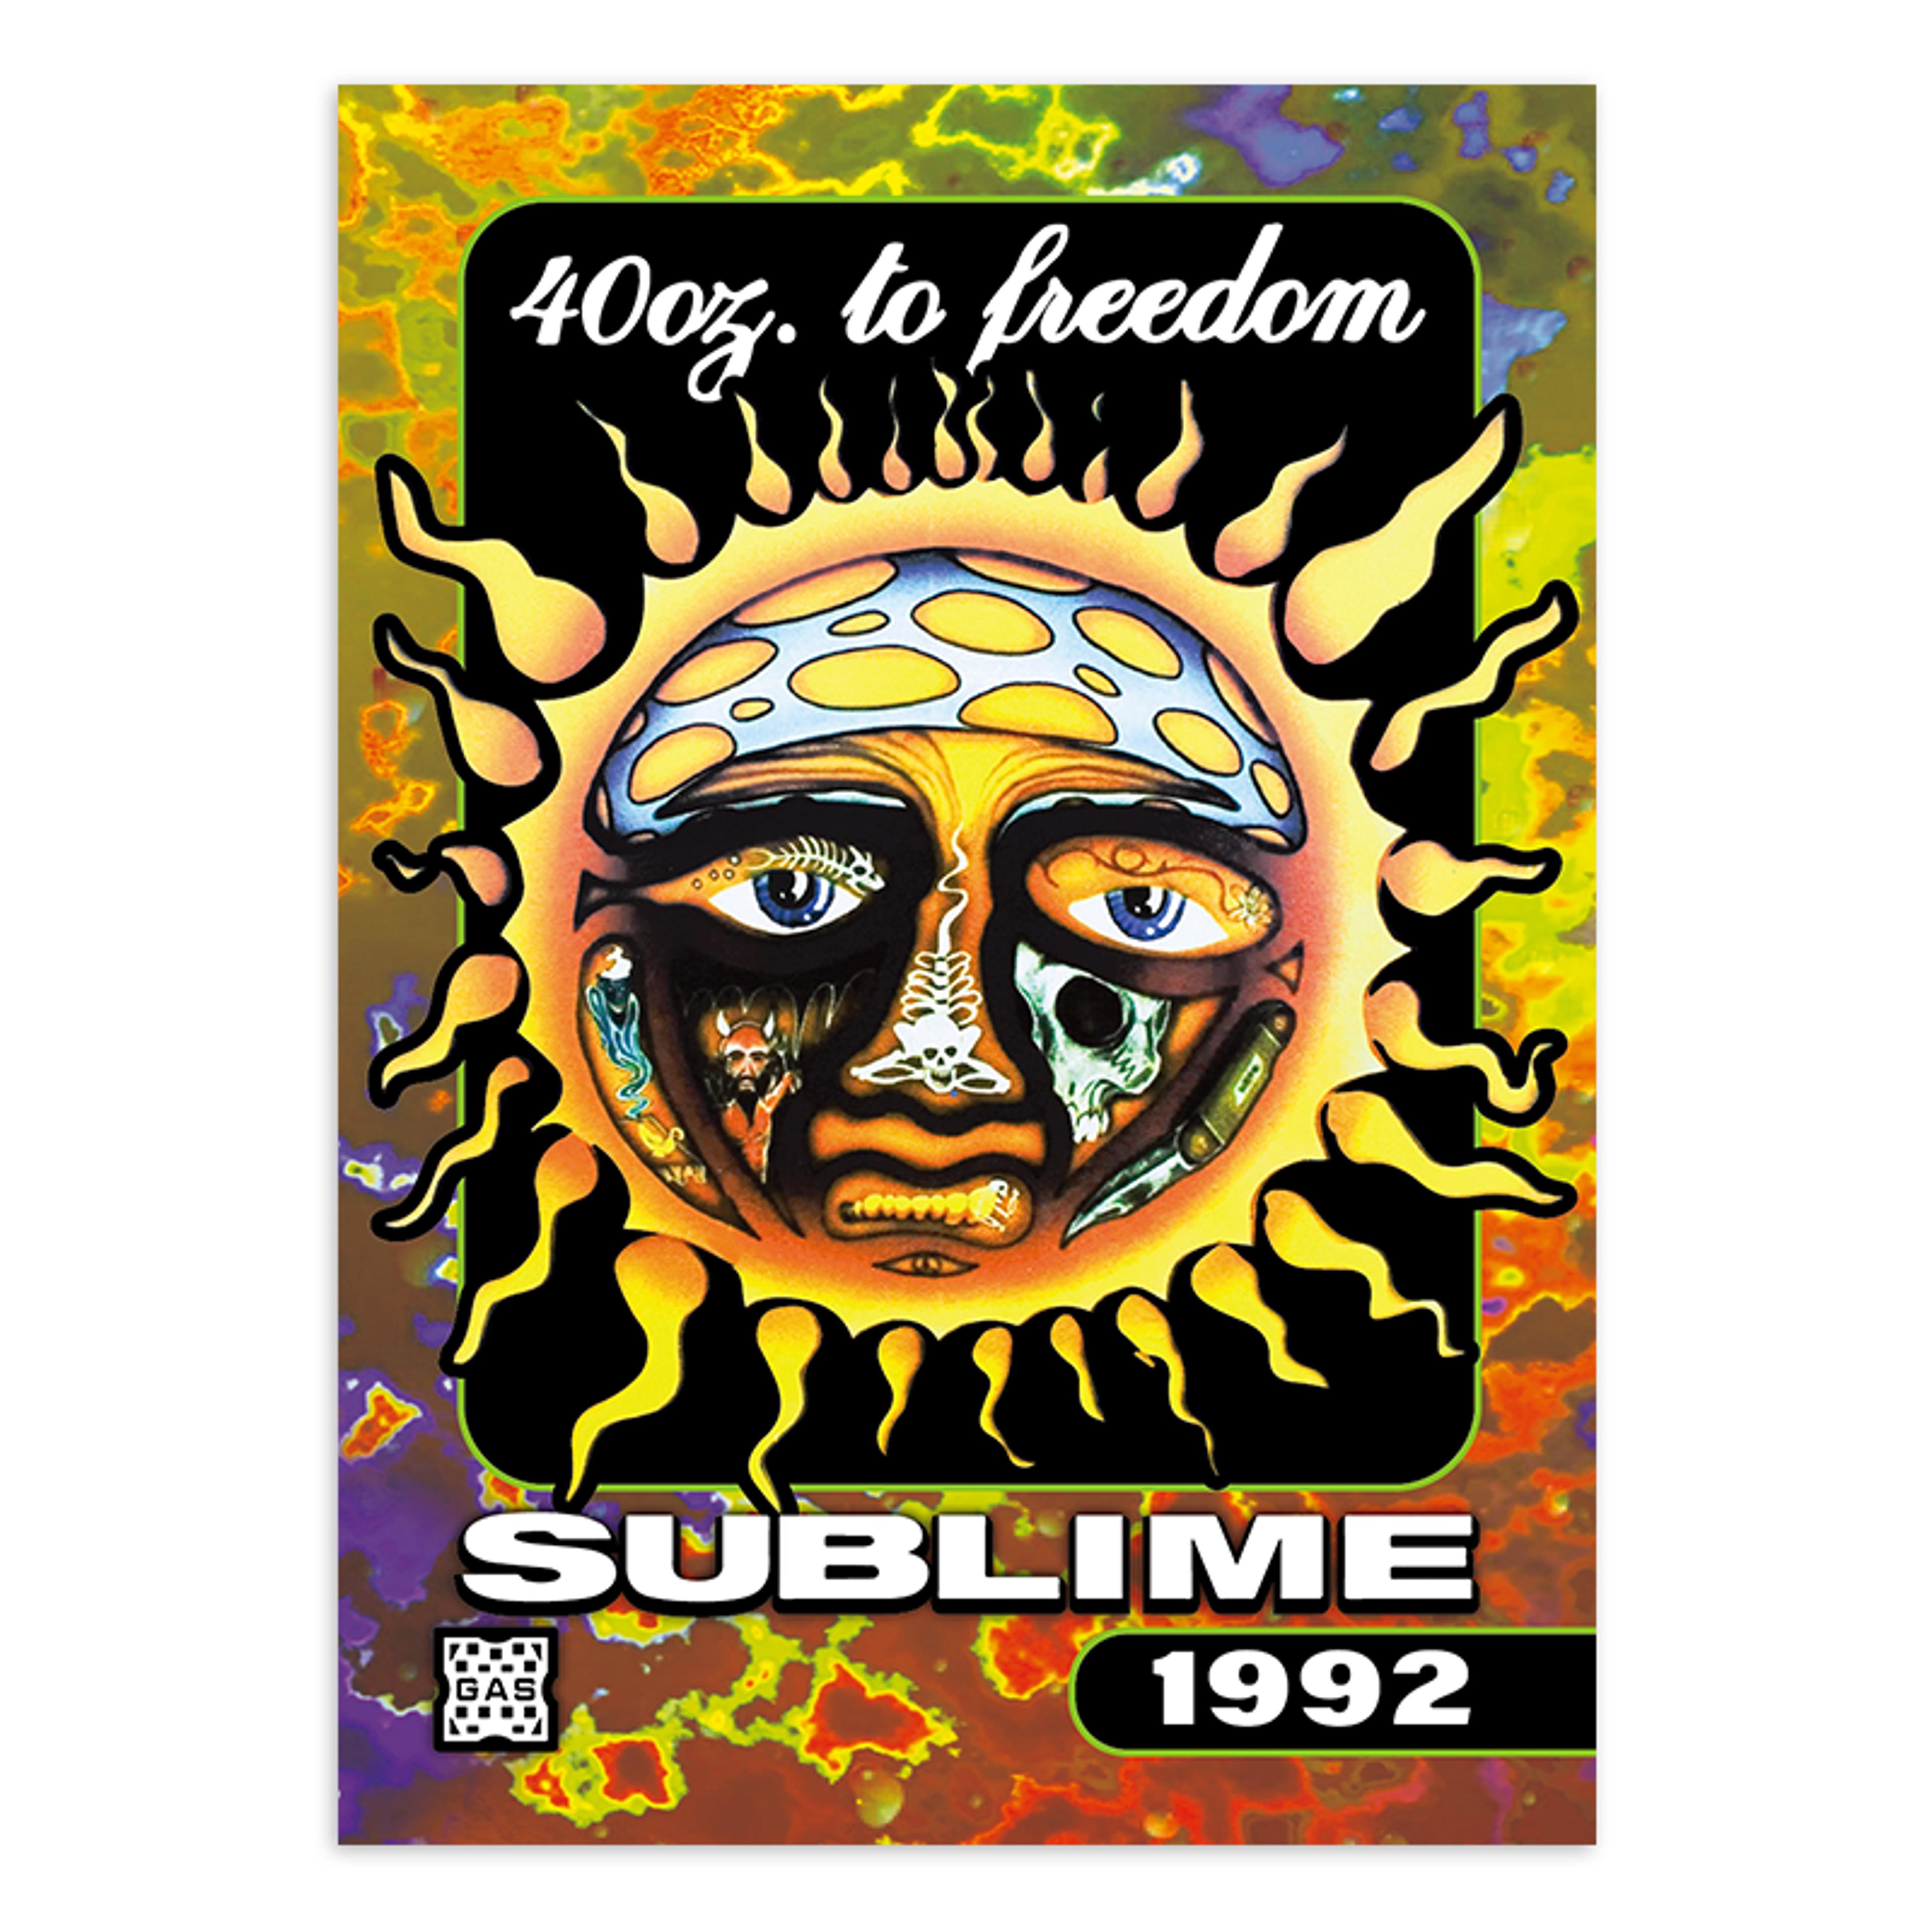 Limited Edition Sublime GAS Magma Foil Card #3 40oz. To Freedom